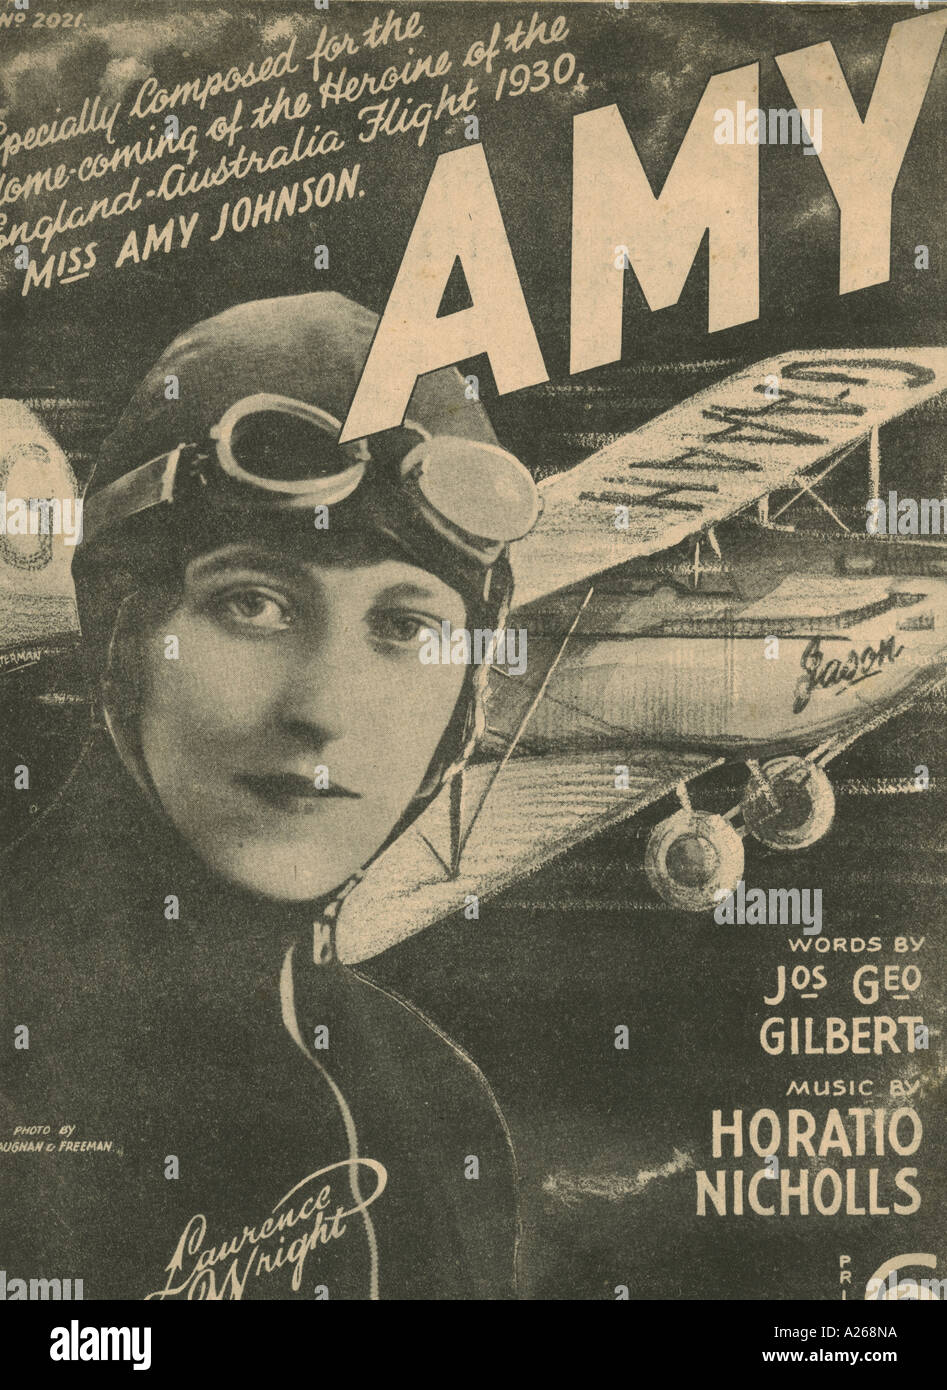 Sheet music cover Amy 1930 composed for the home coming from Amy Johnson's England-Australia solo flight Stock Photo